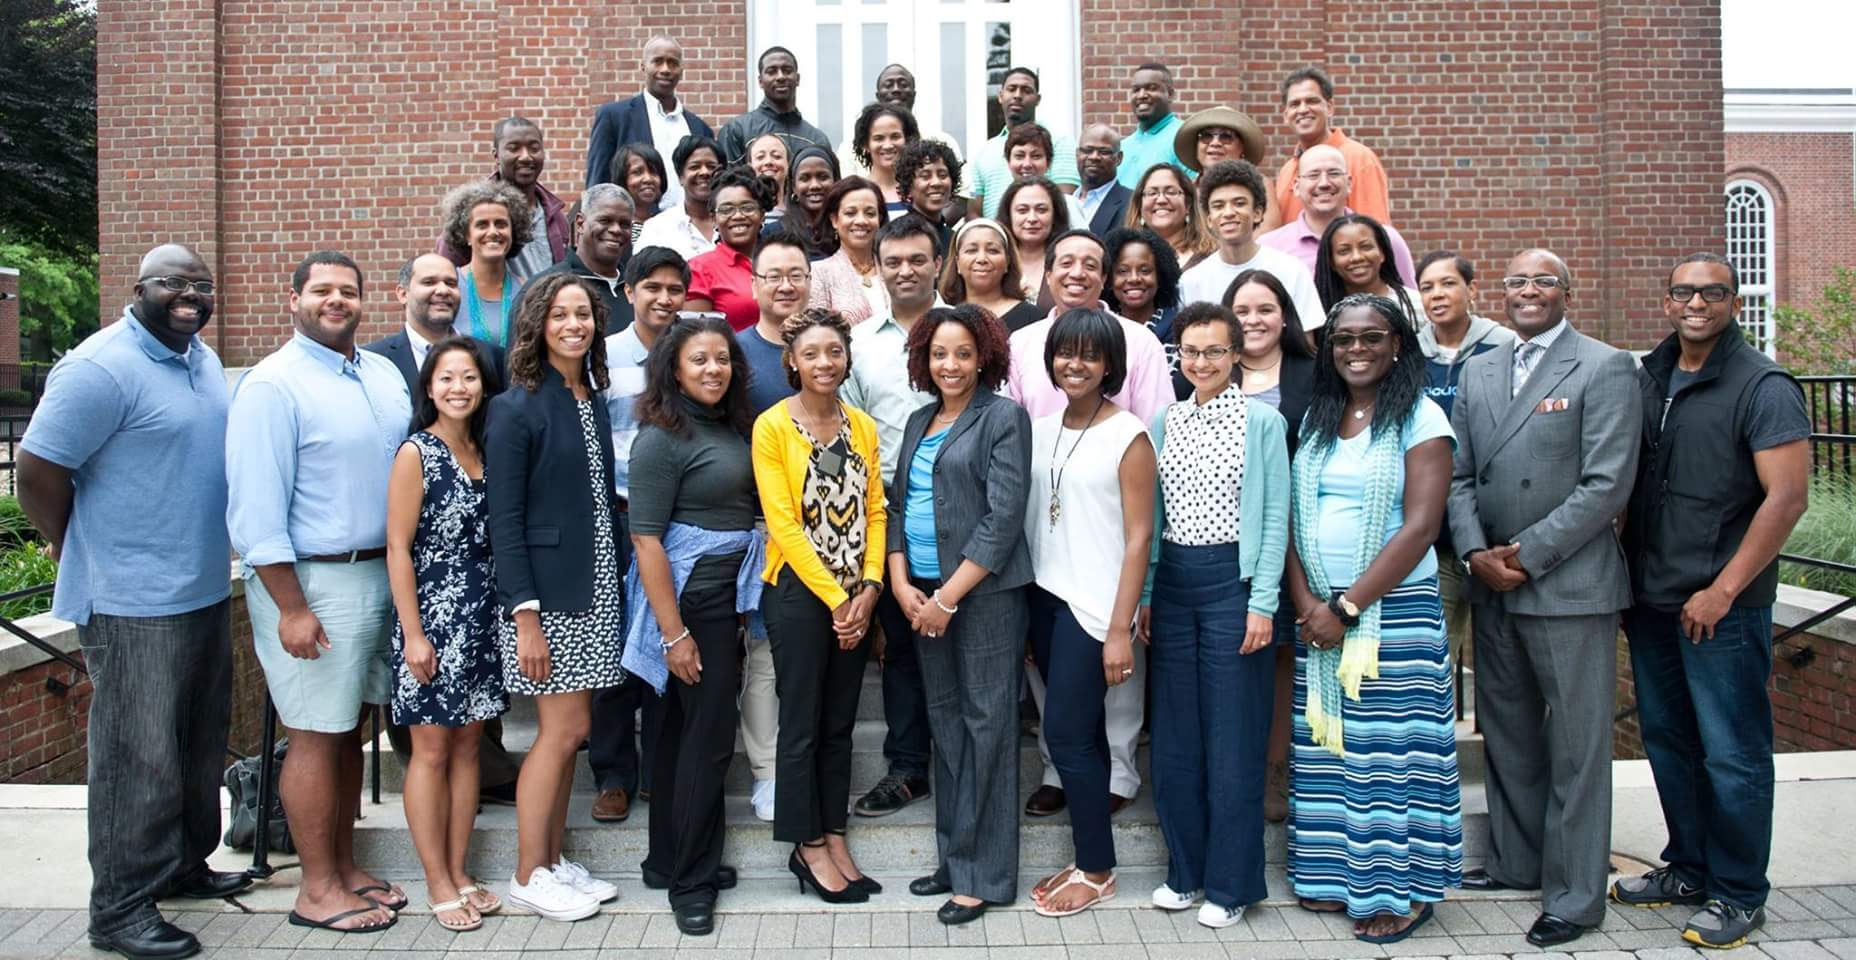 Jacqui a teacher/mentor at the KO Summer Institute to grow administrators of color in independent schools